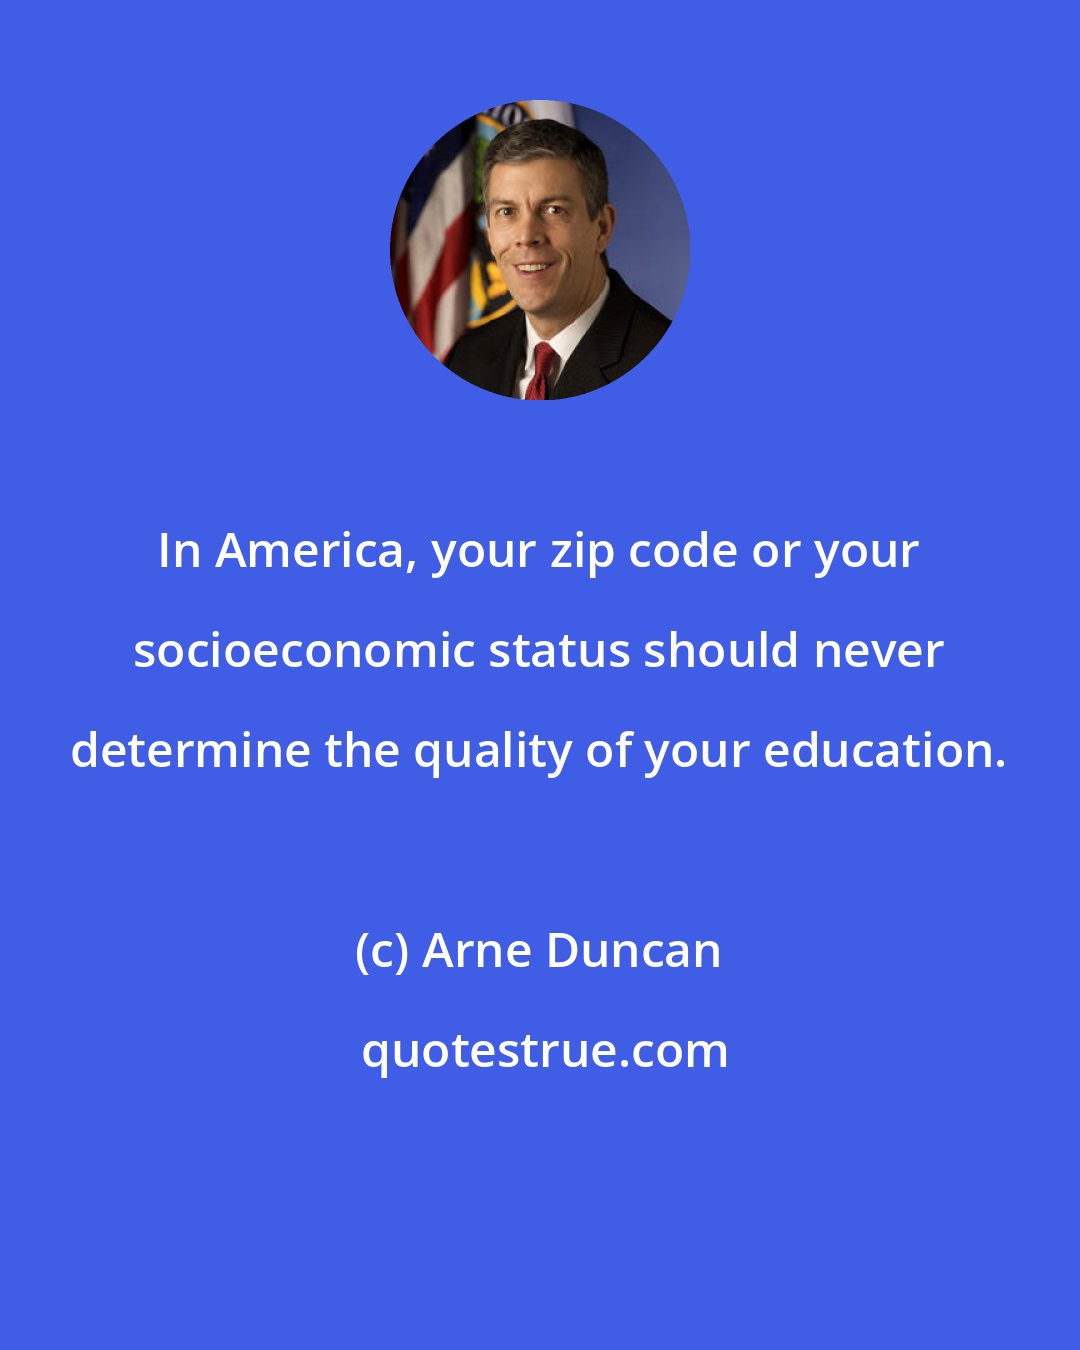 Arne Duncan: In America, your zip code or your socioeconomic status should never determine the quality of your education.